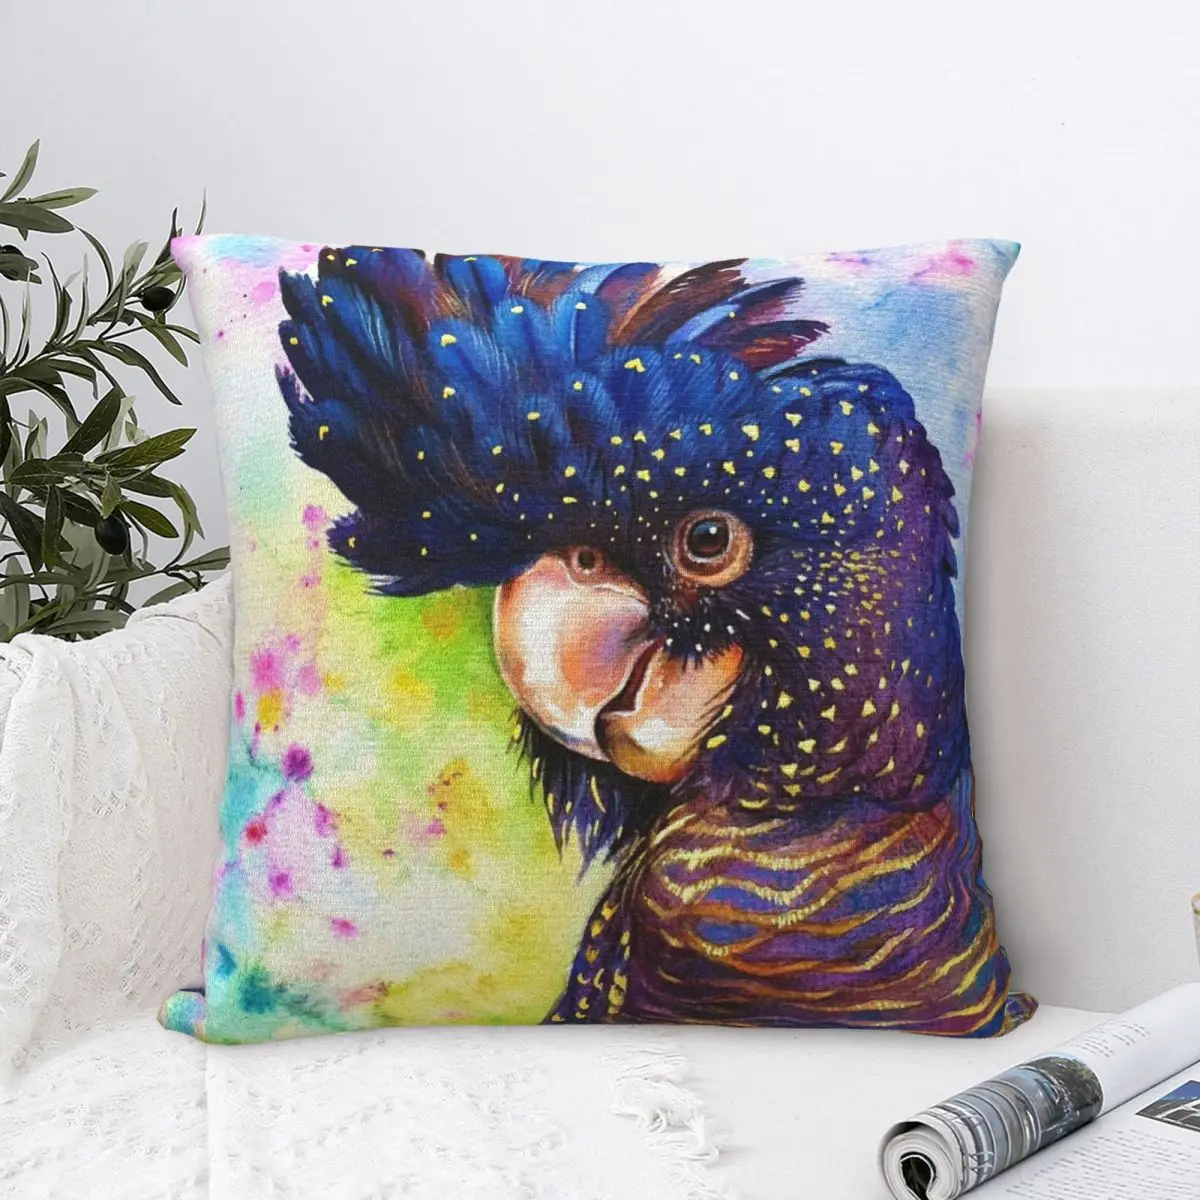 

Black Cockatoo Square Pillowcase Cushion Cover Decorative Pillow Case Polyester Throw Pillow cover For Home Sofa Living Room